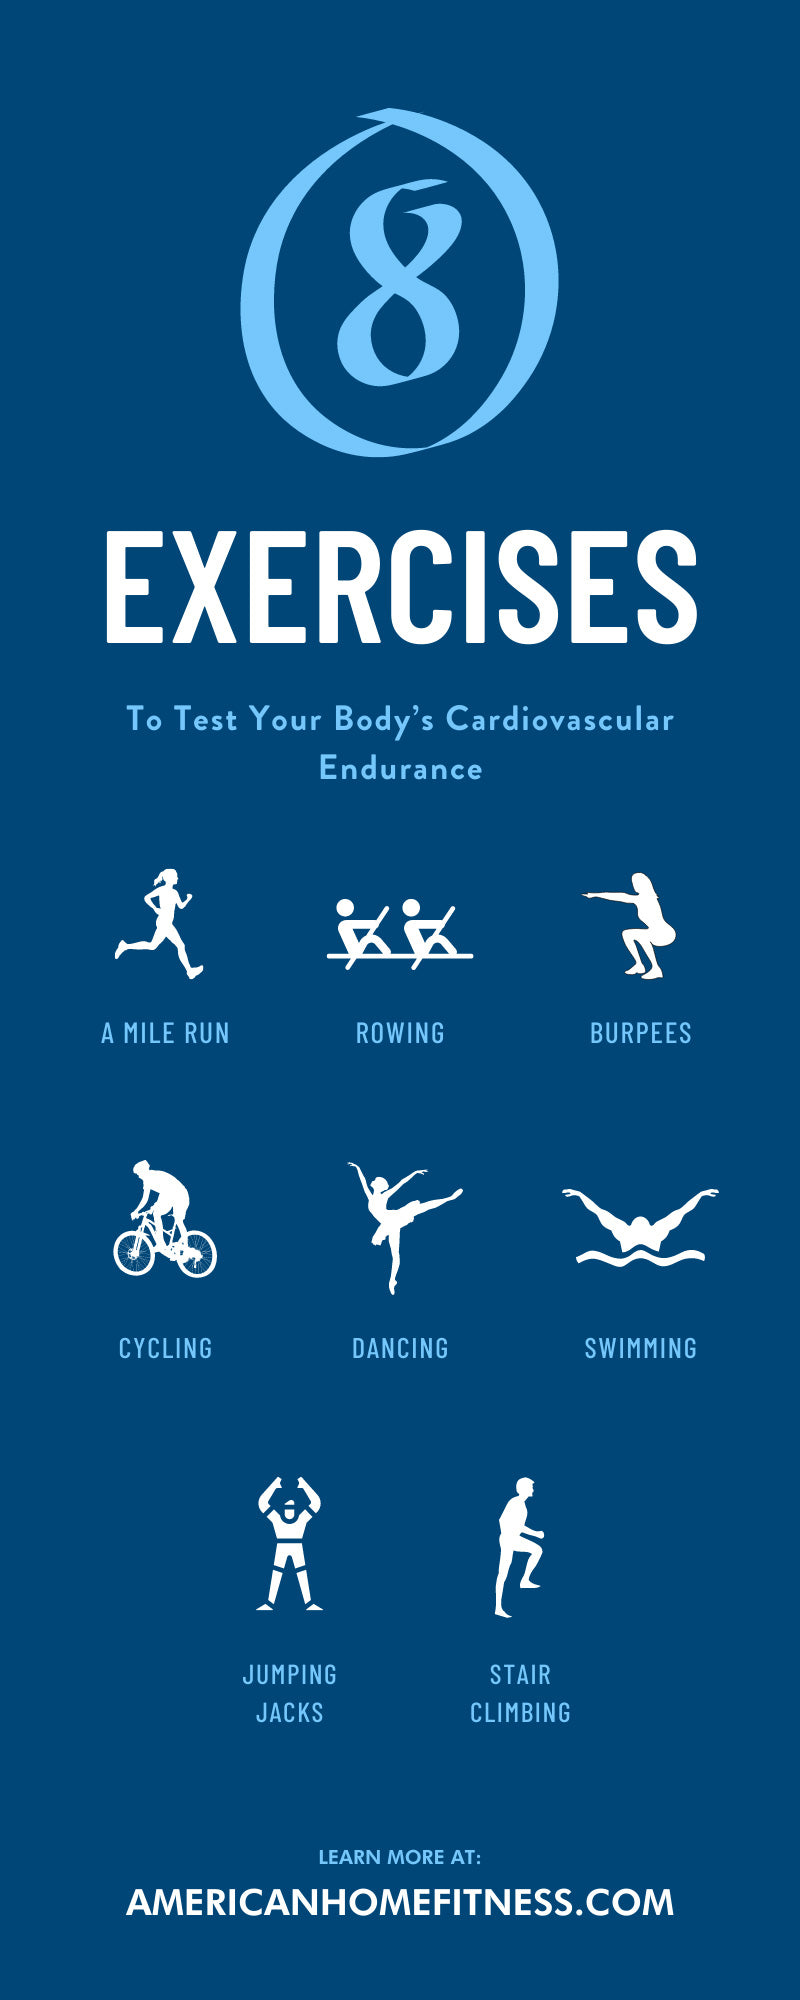 8 Exercises To Test Your Body’s Cardiovascular Endurance